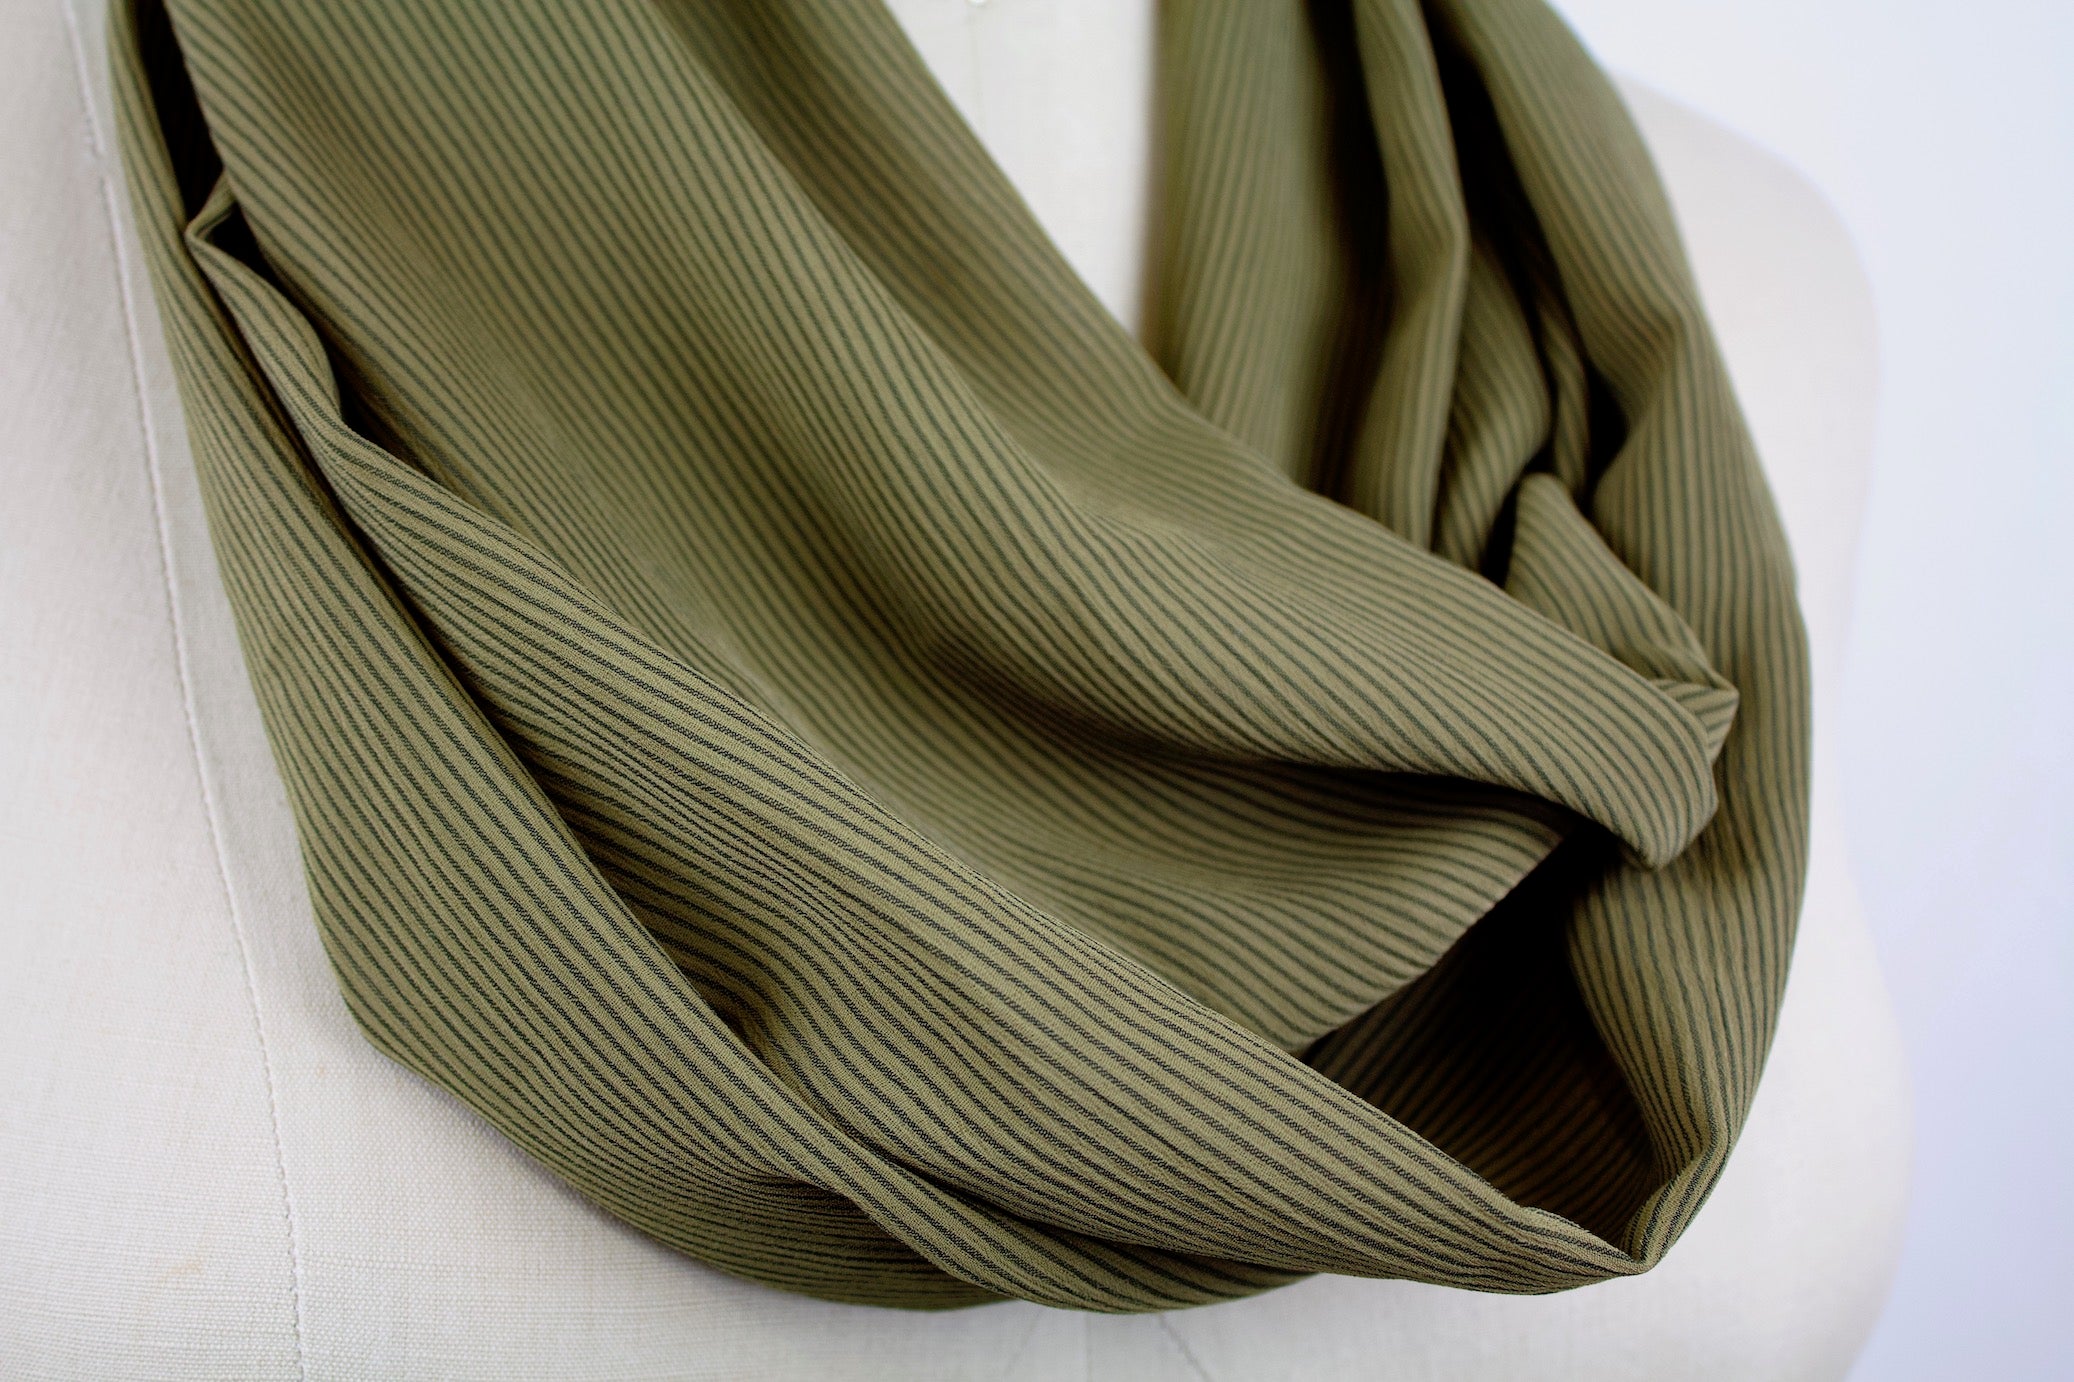 Forest Walk Infinity Scarf-The Blue Peony-Category_Infinity Scarf,Color_Green,Department_Personal Accessory,Material_Polyester,Pattern_Stripes